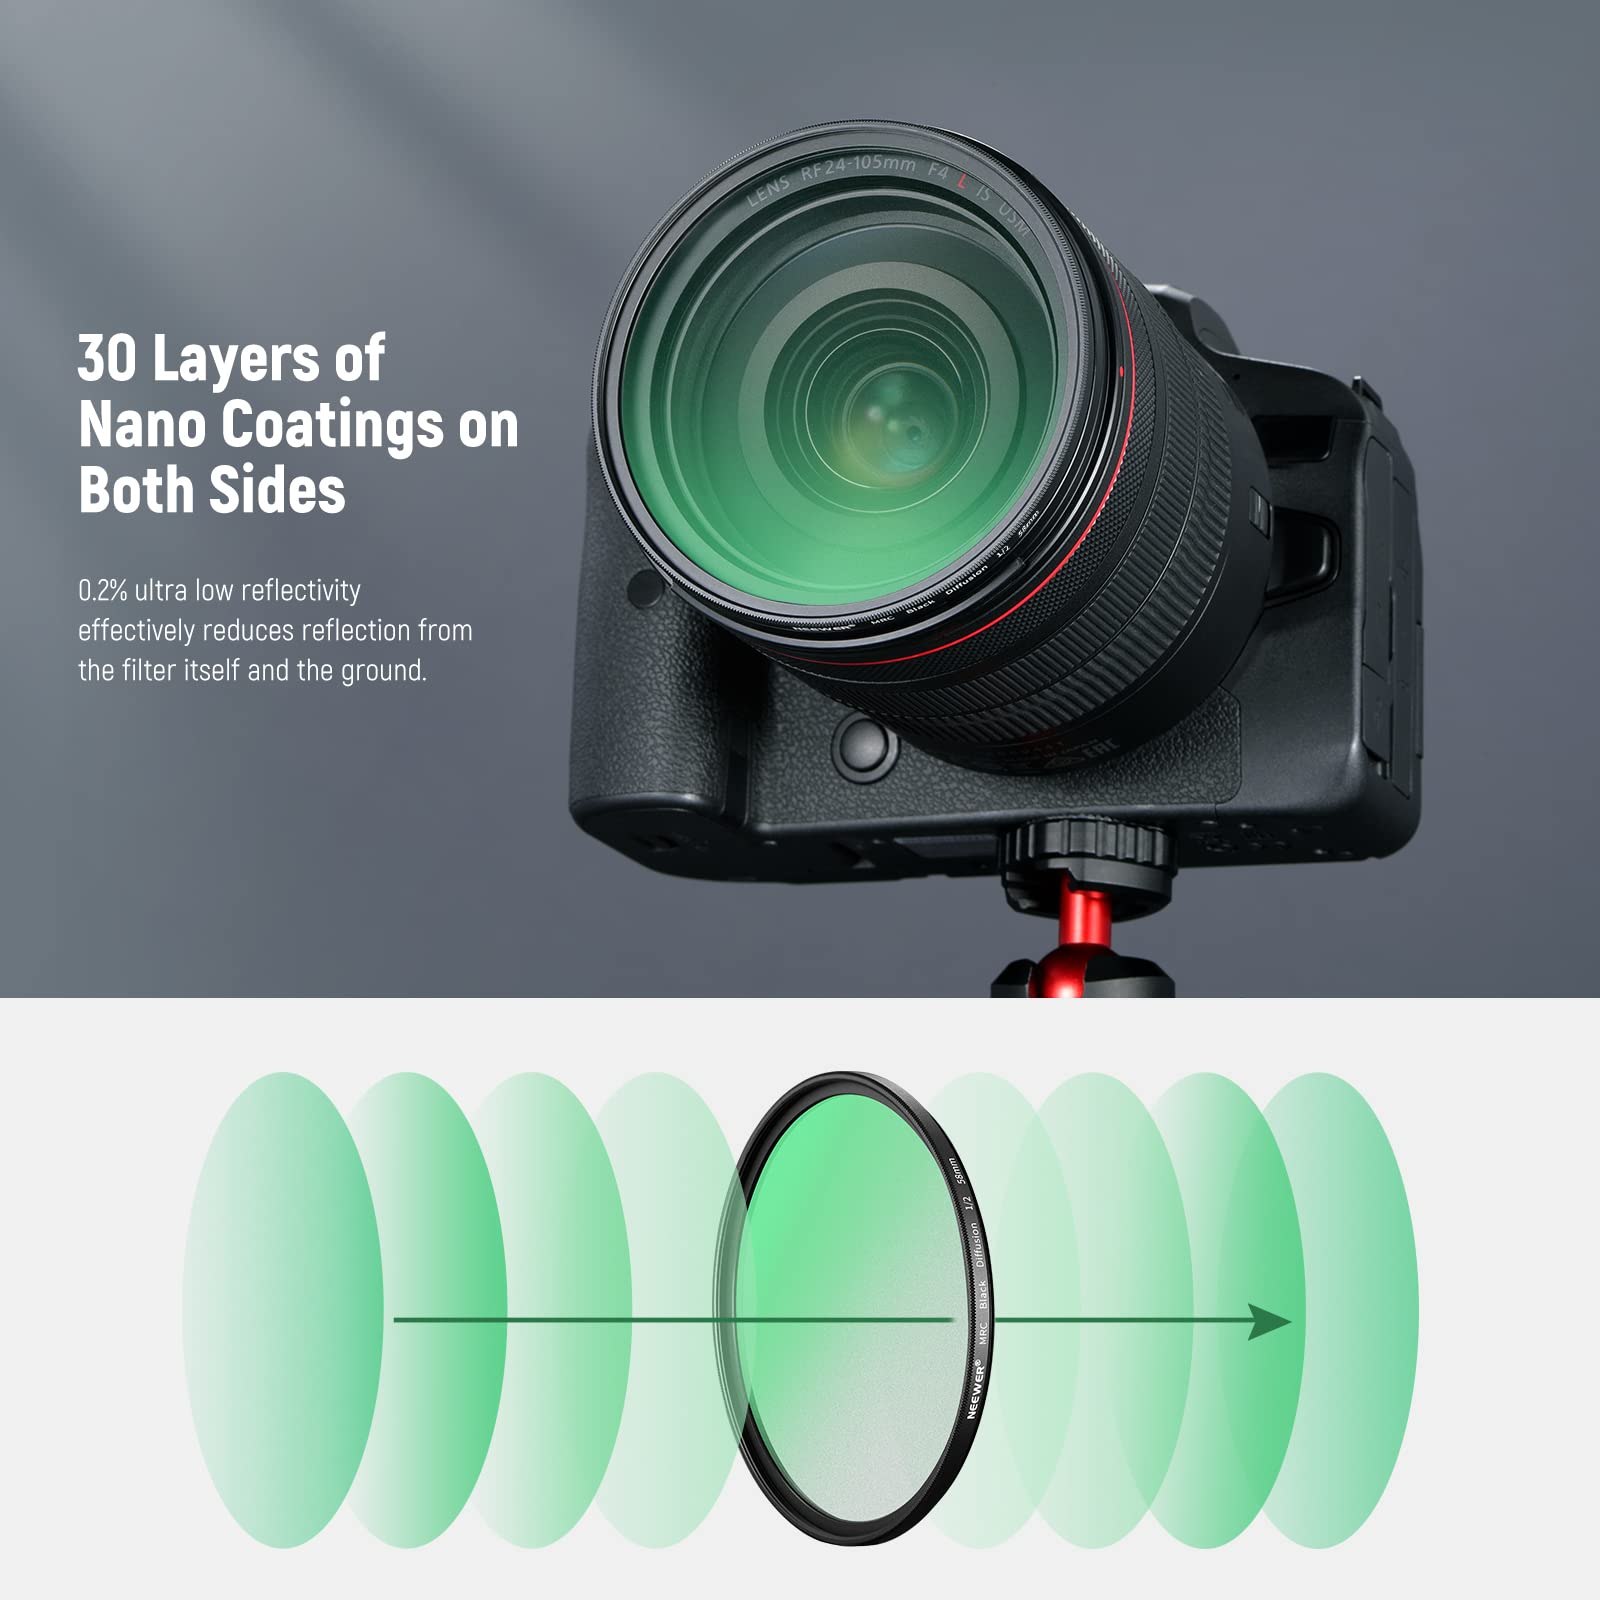 NEEWER 58mm Black Diffusion 1/2 Filter Mist Dreamy Cinematic Effect Filter Ultra Slim Water Repellent Scratch Resistant HD Optical Glass, 30 Layers Nano Coatings for Video/Vlog/Portrait Photography